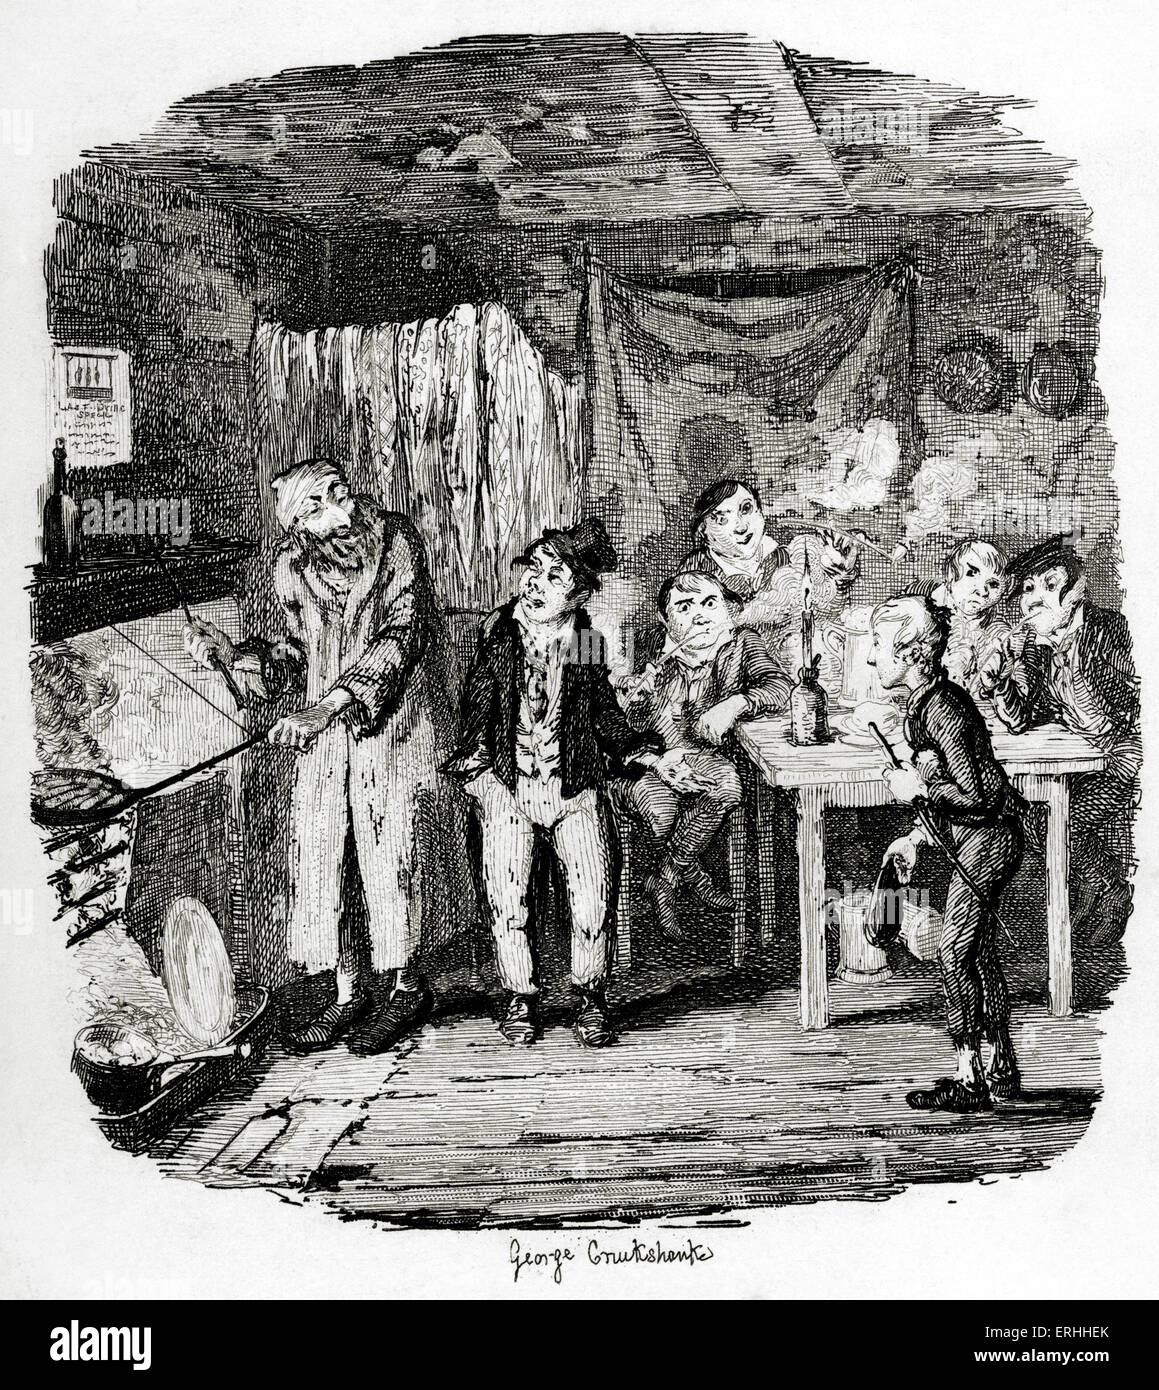 Charles Dickens 's 'The Adventures of Oliver Twist' : Jack Dawkins introducing Oliver to Fagin. English novelist 7 February 1812 – 9 June 1870. Illustration by George Cruikshank. Stock Photo